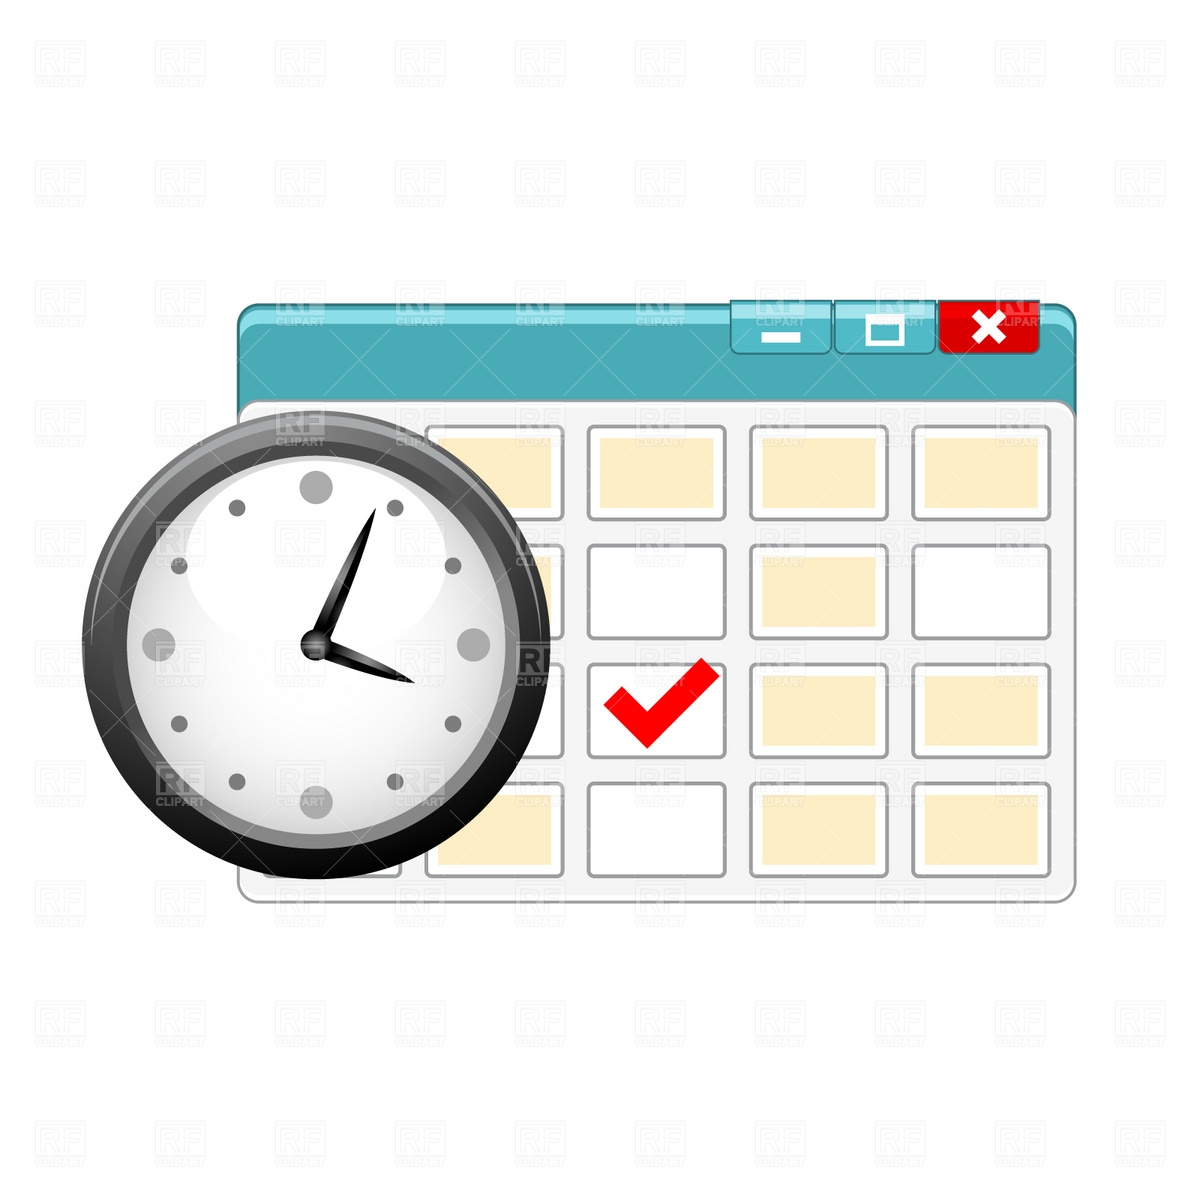 Personal Organizer Icon With Clock And Calendar Download Royalty Free